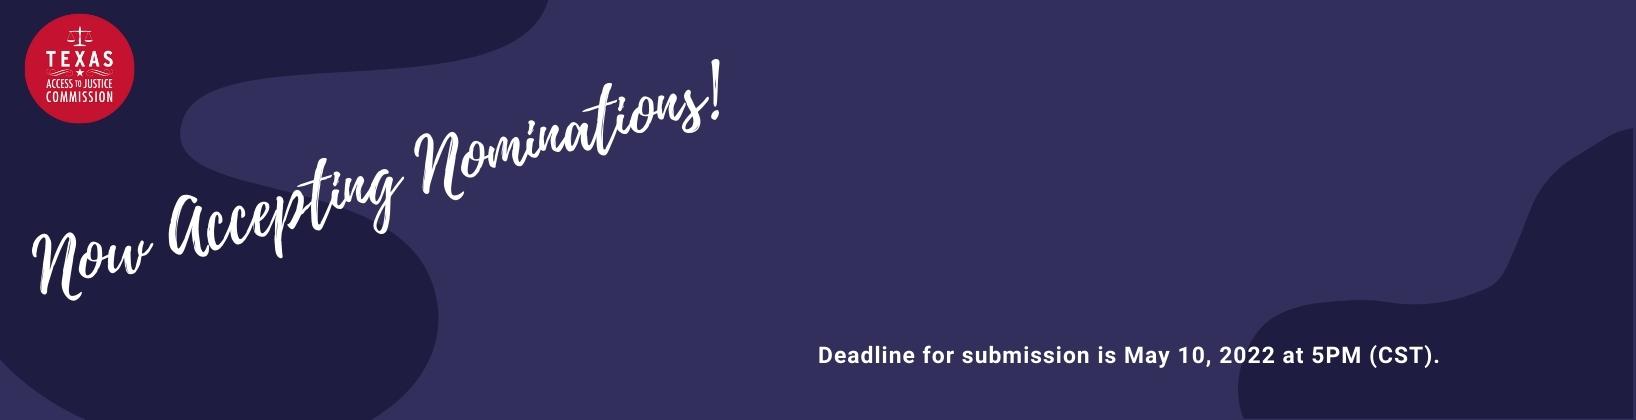 Now Accepting Nominations! Deadline for submission is May 10, 2022 at 5PM (CST).